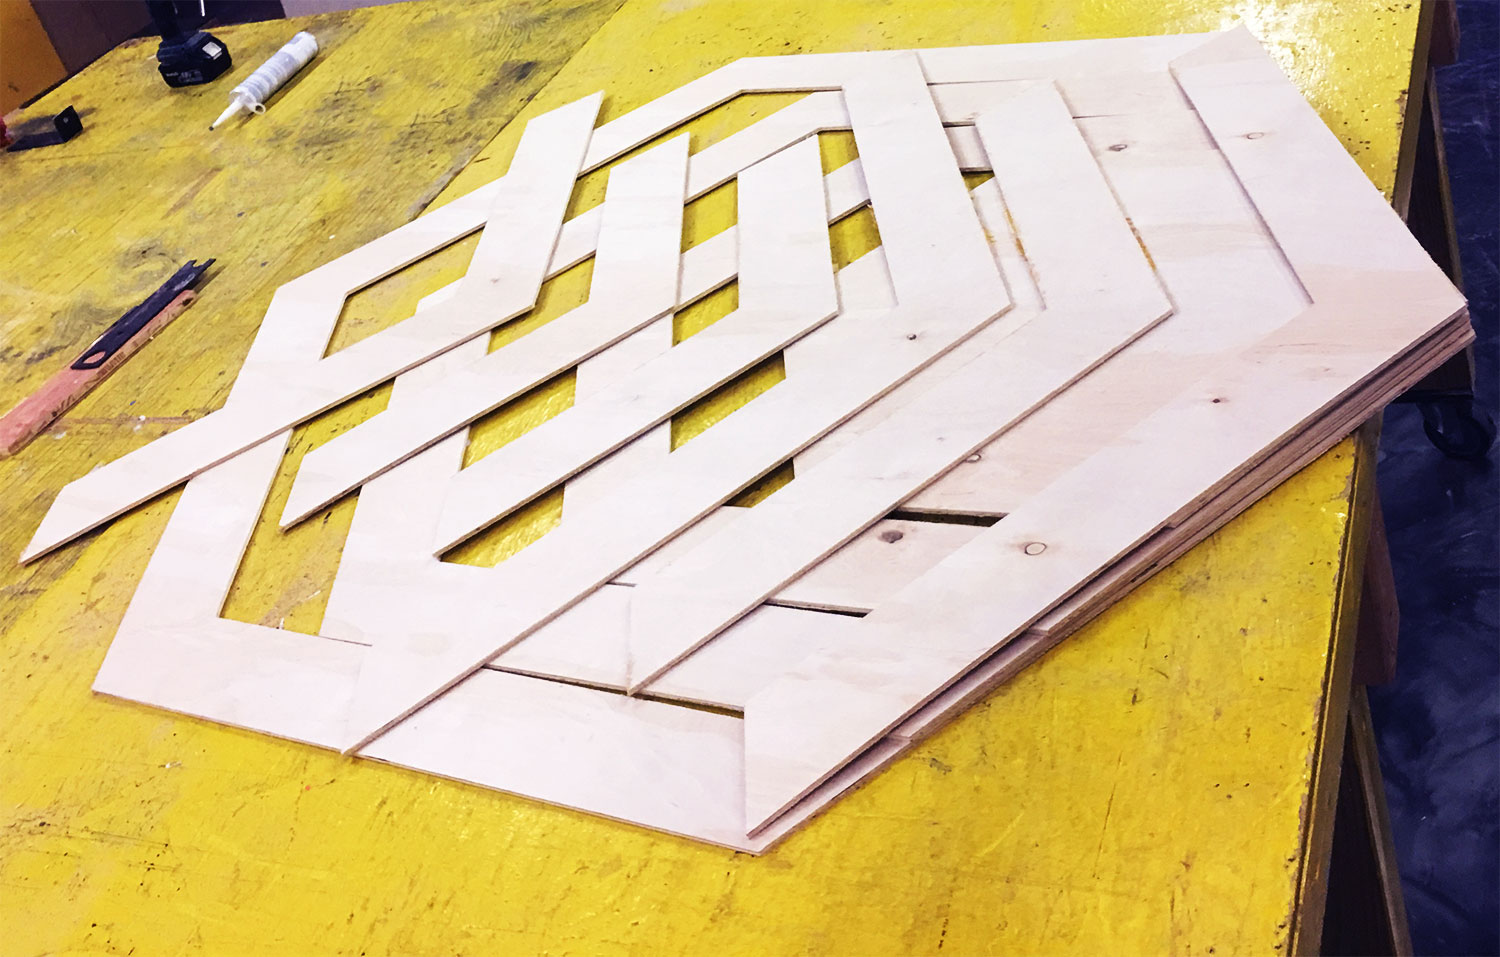 custom cut shapes out of wood to create design pattern